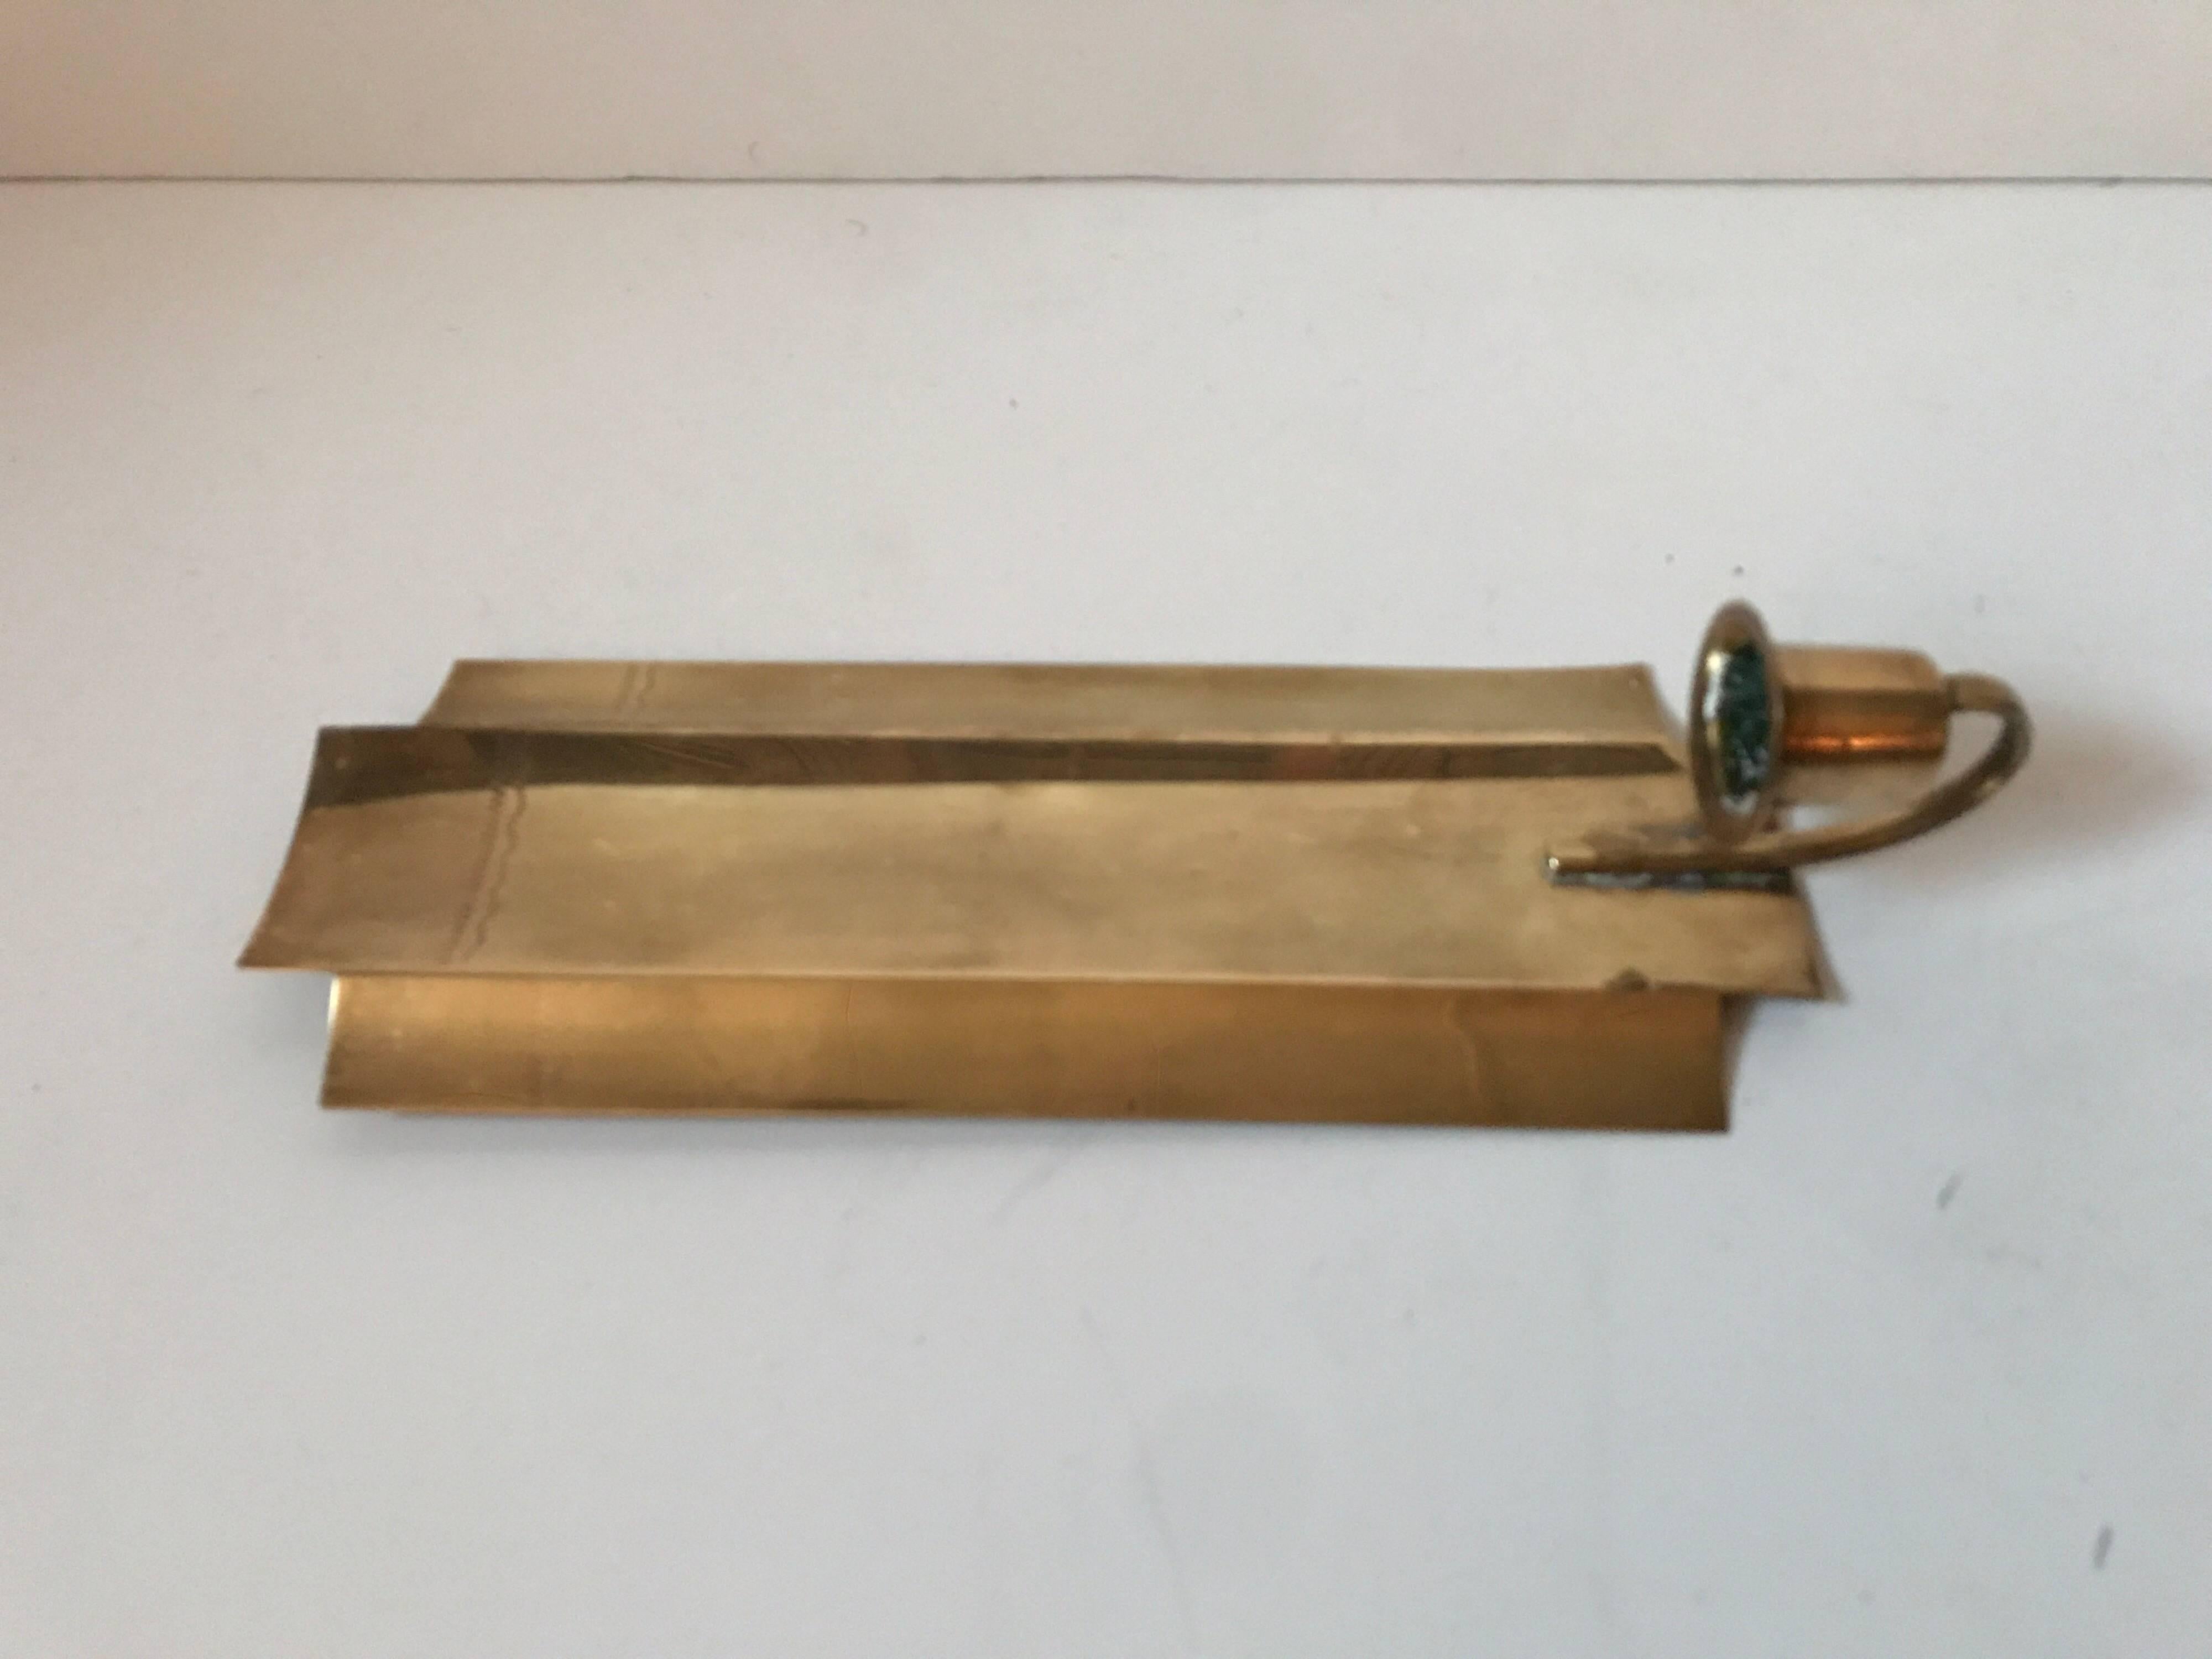 Scandinavian Modern Pair of Swedish Brass Candle Wall Sconces, 1950 For Sale